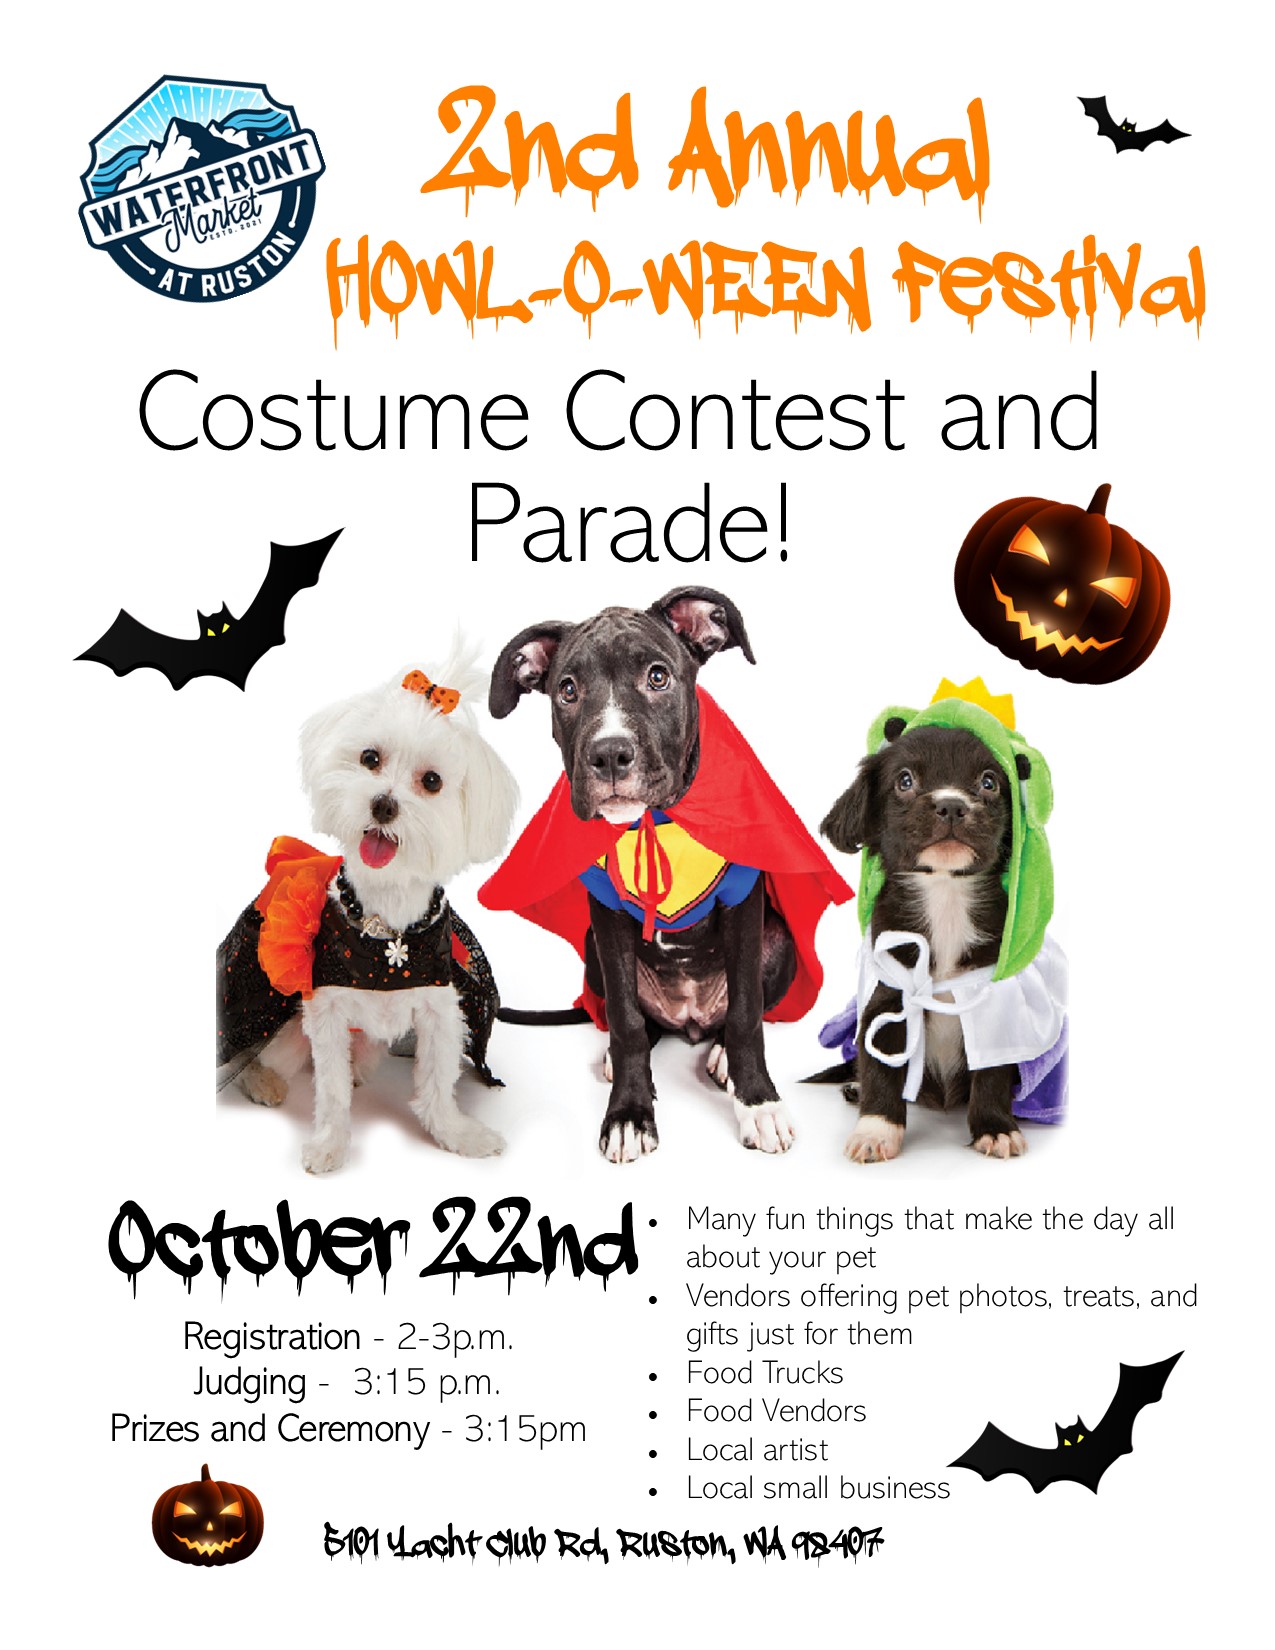 HOWL-O-WEEN Festival: Dog Costume Contest and Parade - Waterfront